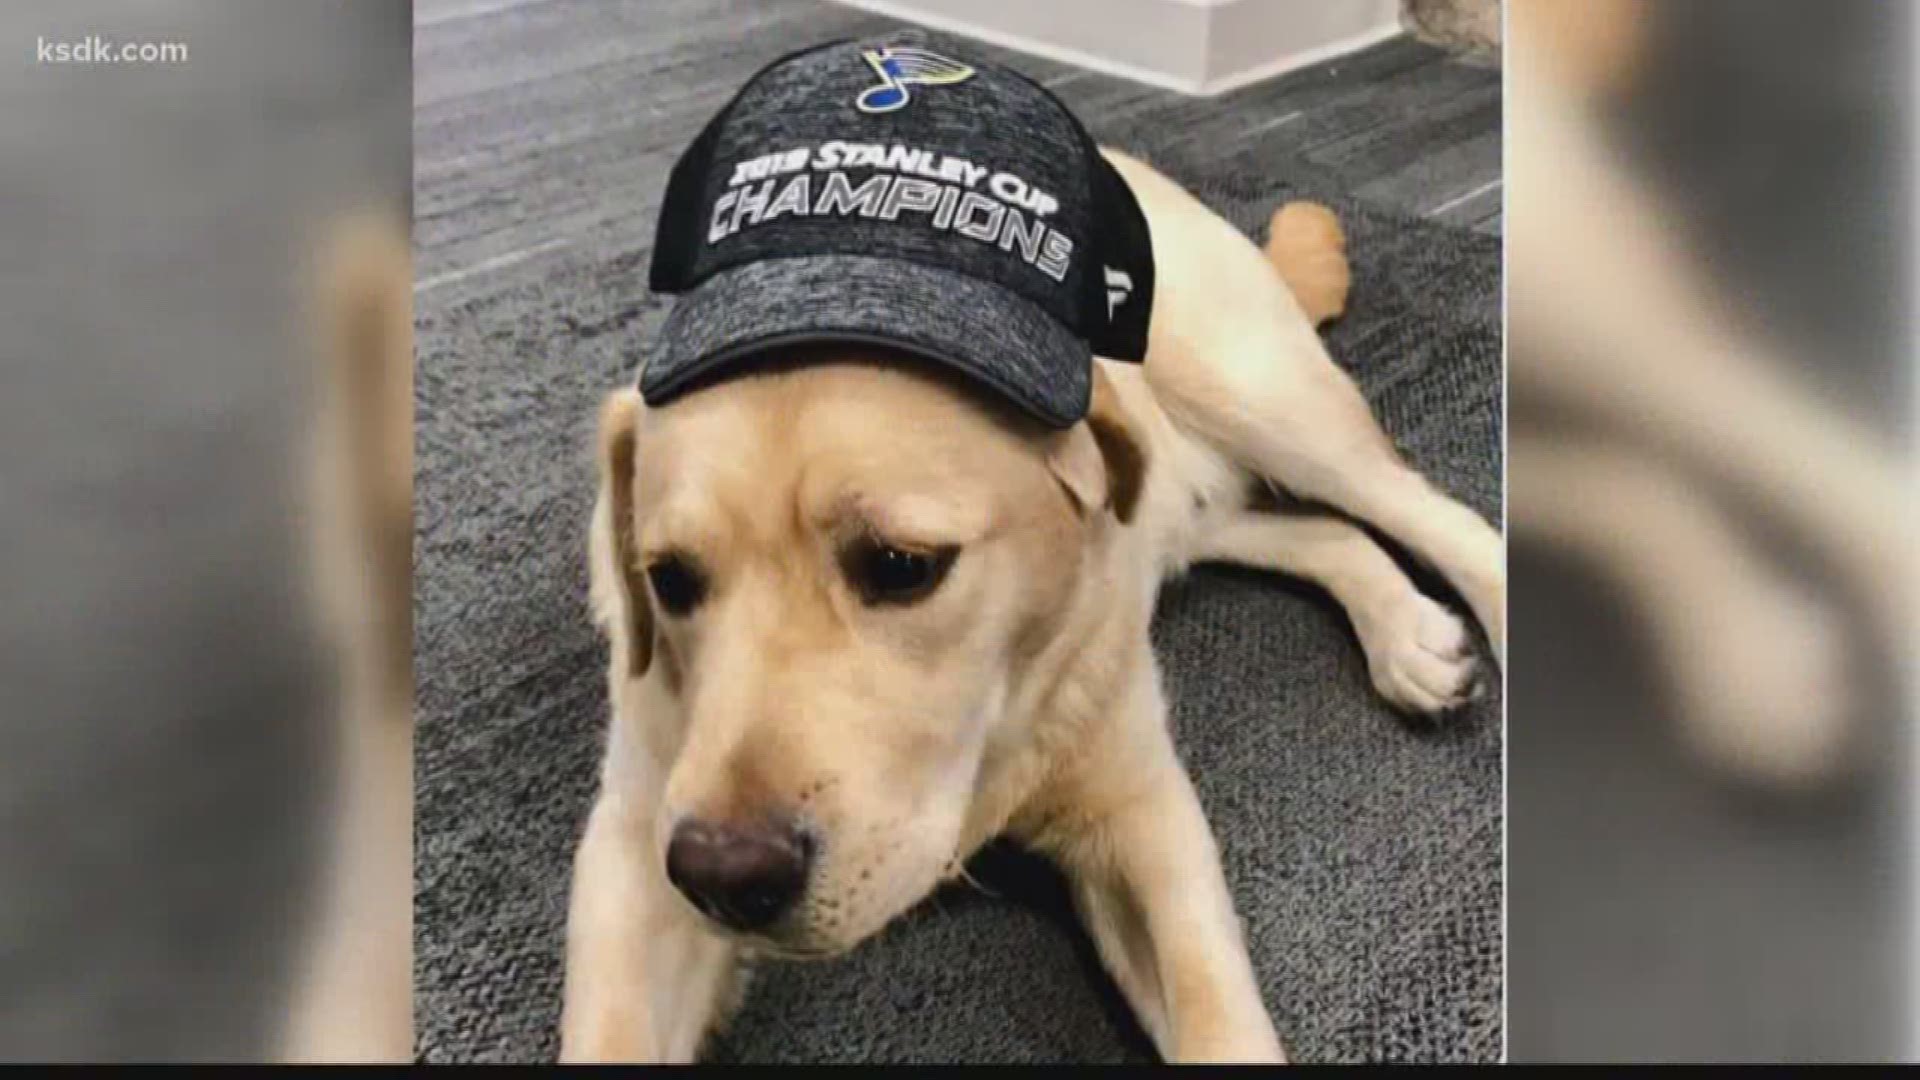 Barclay is the Stanley pup and the best team dog